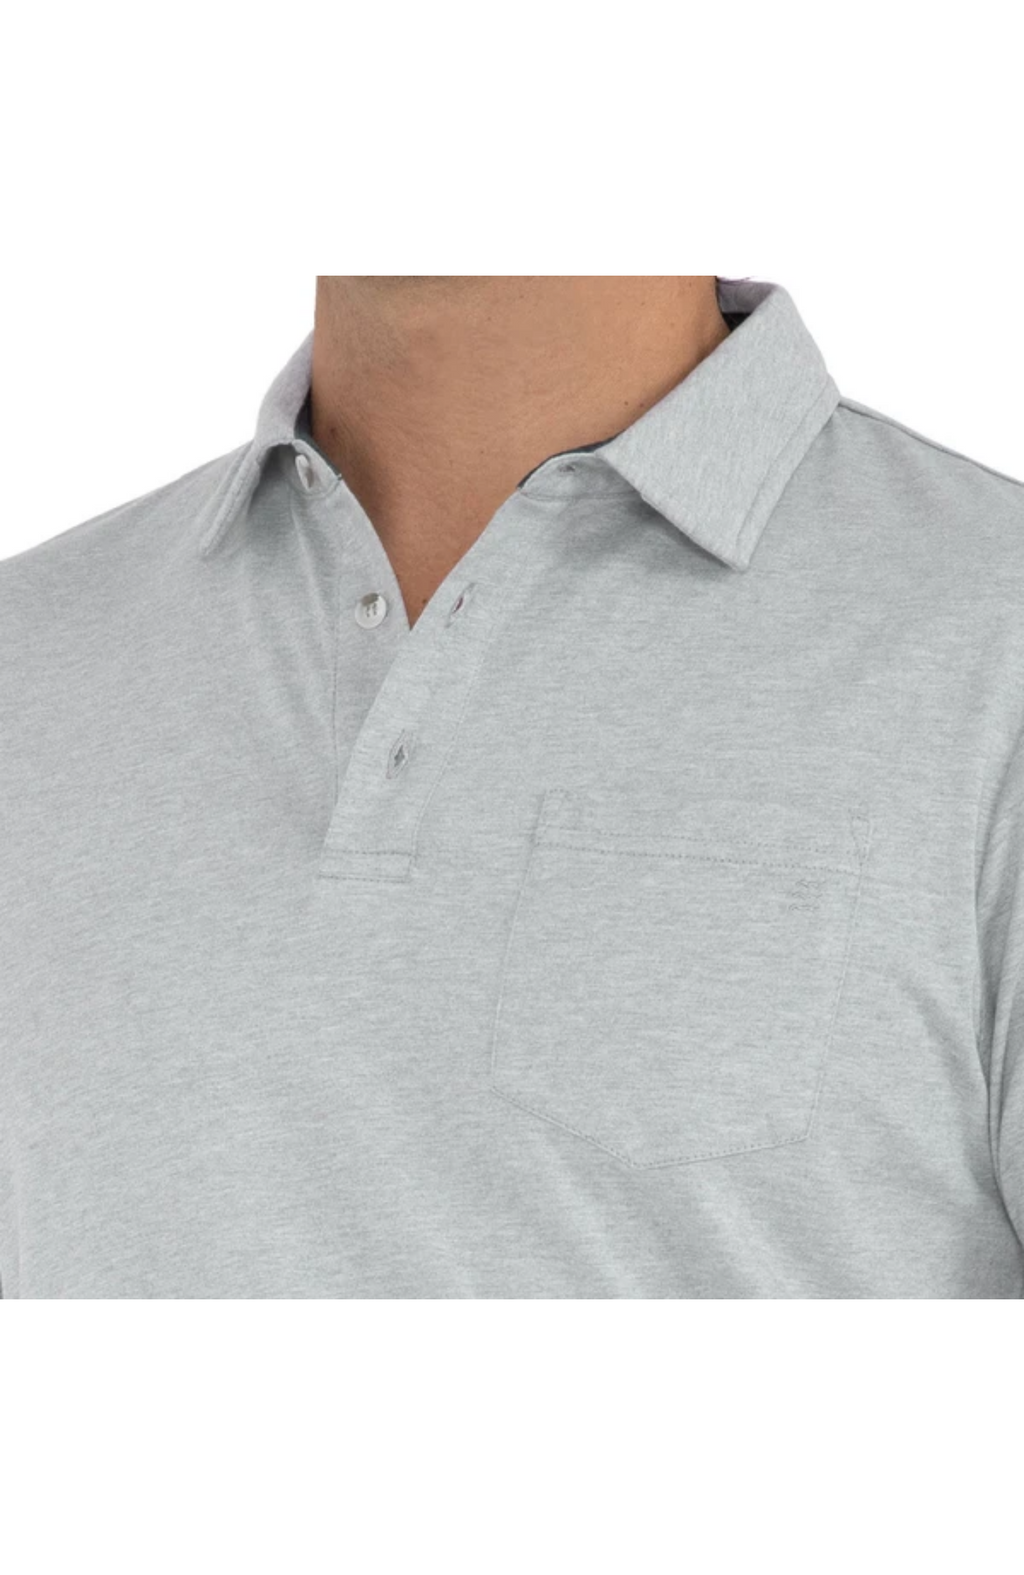 Free Fly - Men's Bamboo Heritage Polo